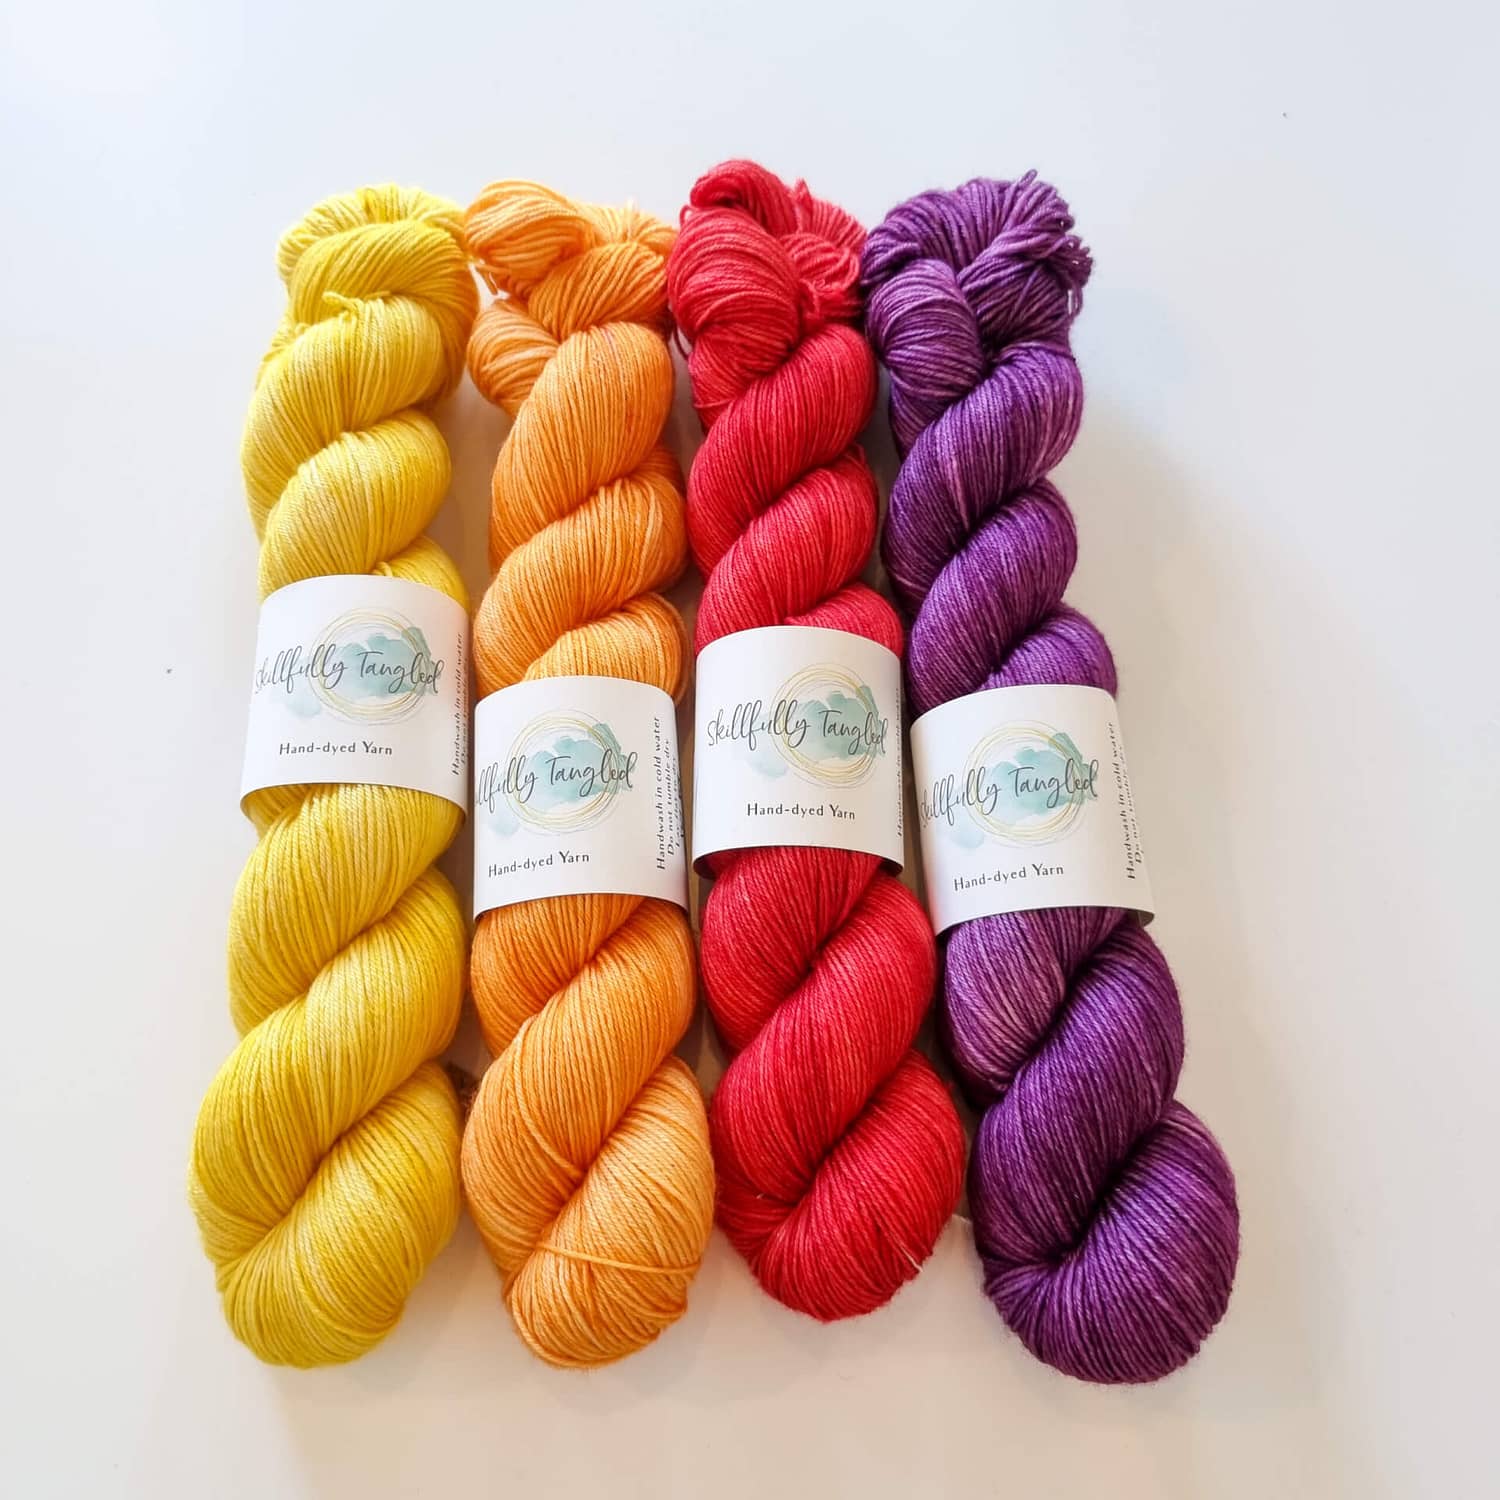 Four skeins of hand dyed merino yarn in yellow, orange, red, and purple. They are a kit for the Geogradient MKAL